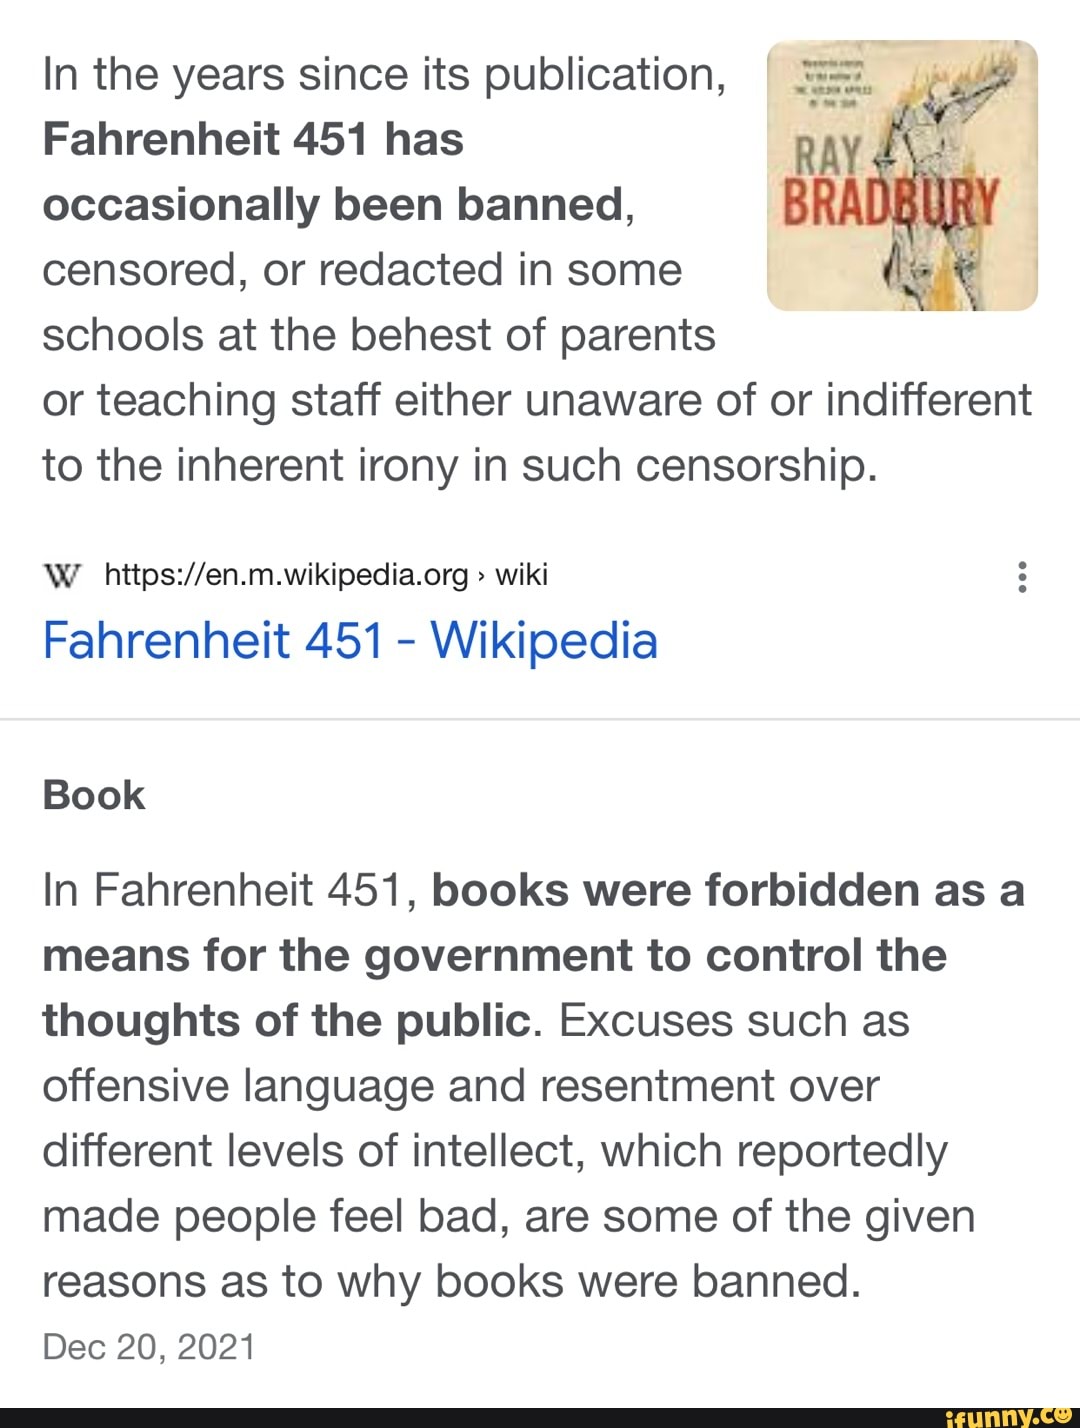 In the years since its publication, Fahrenheit 451 has